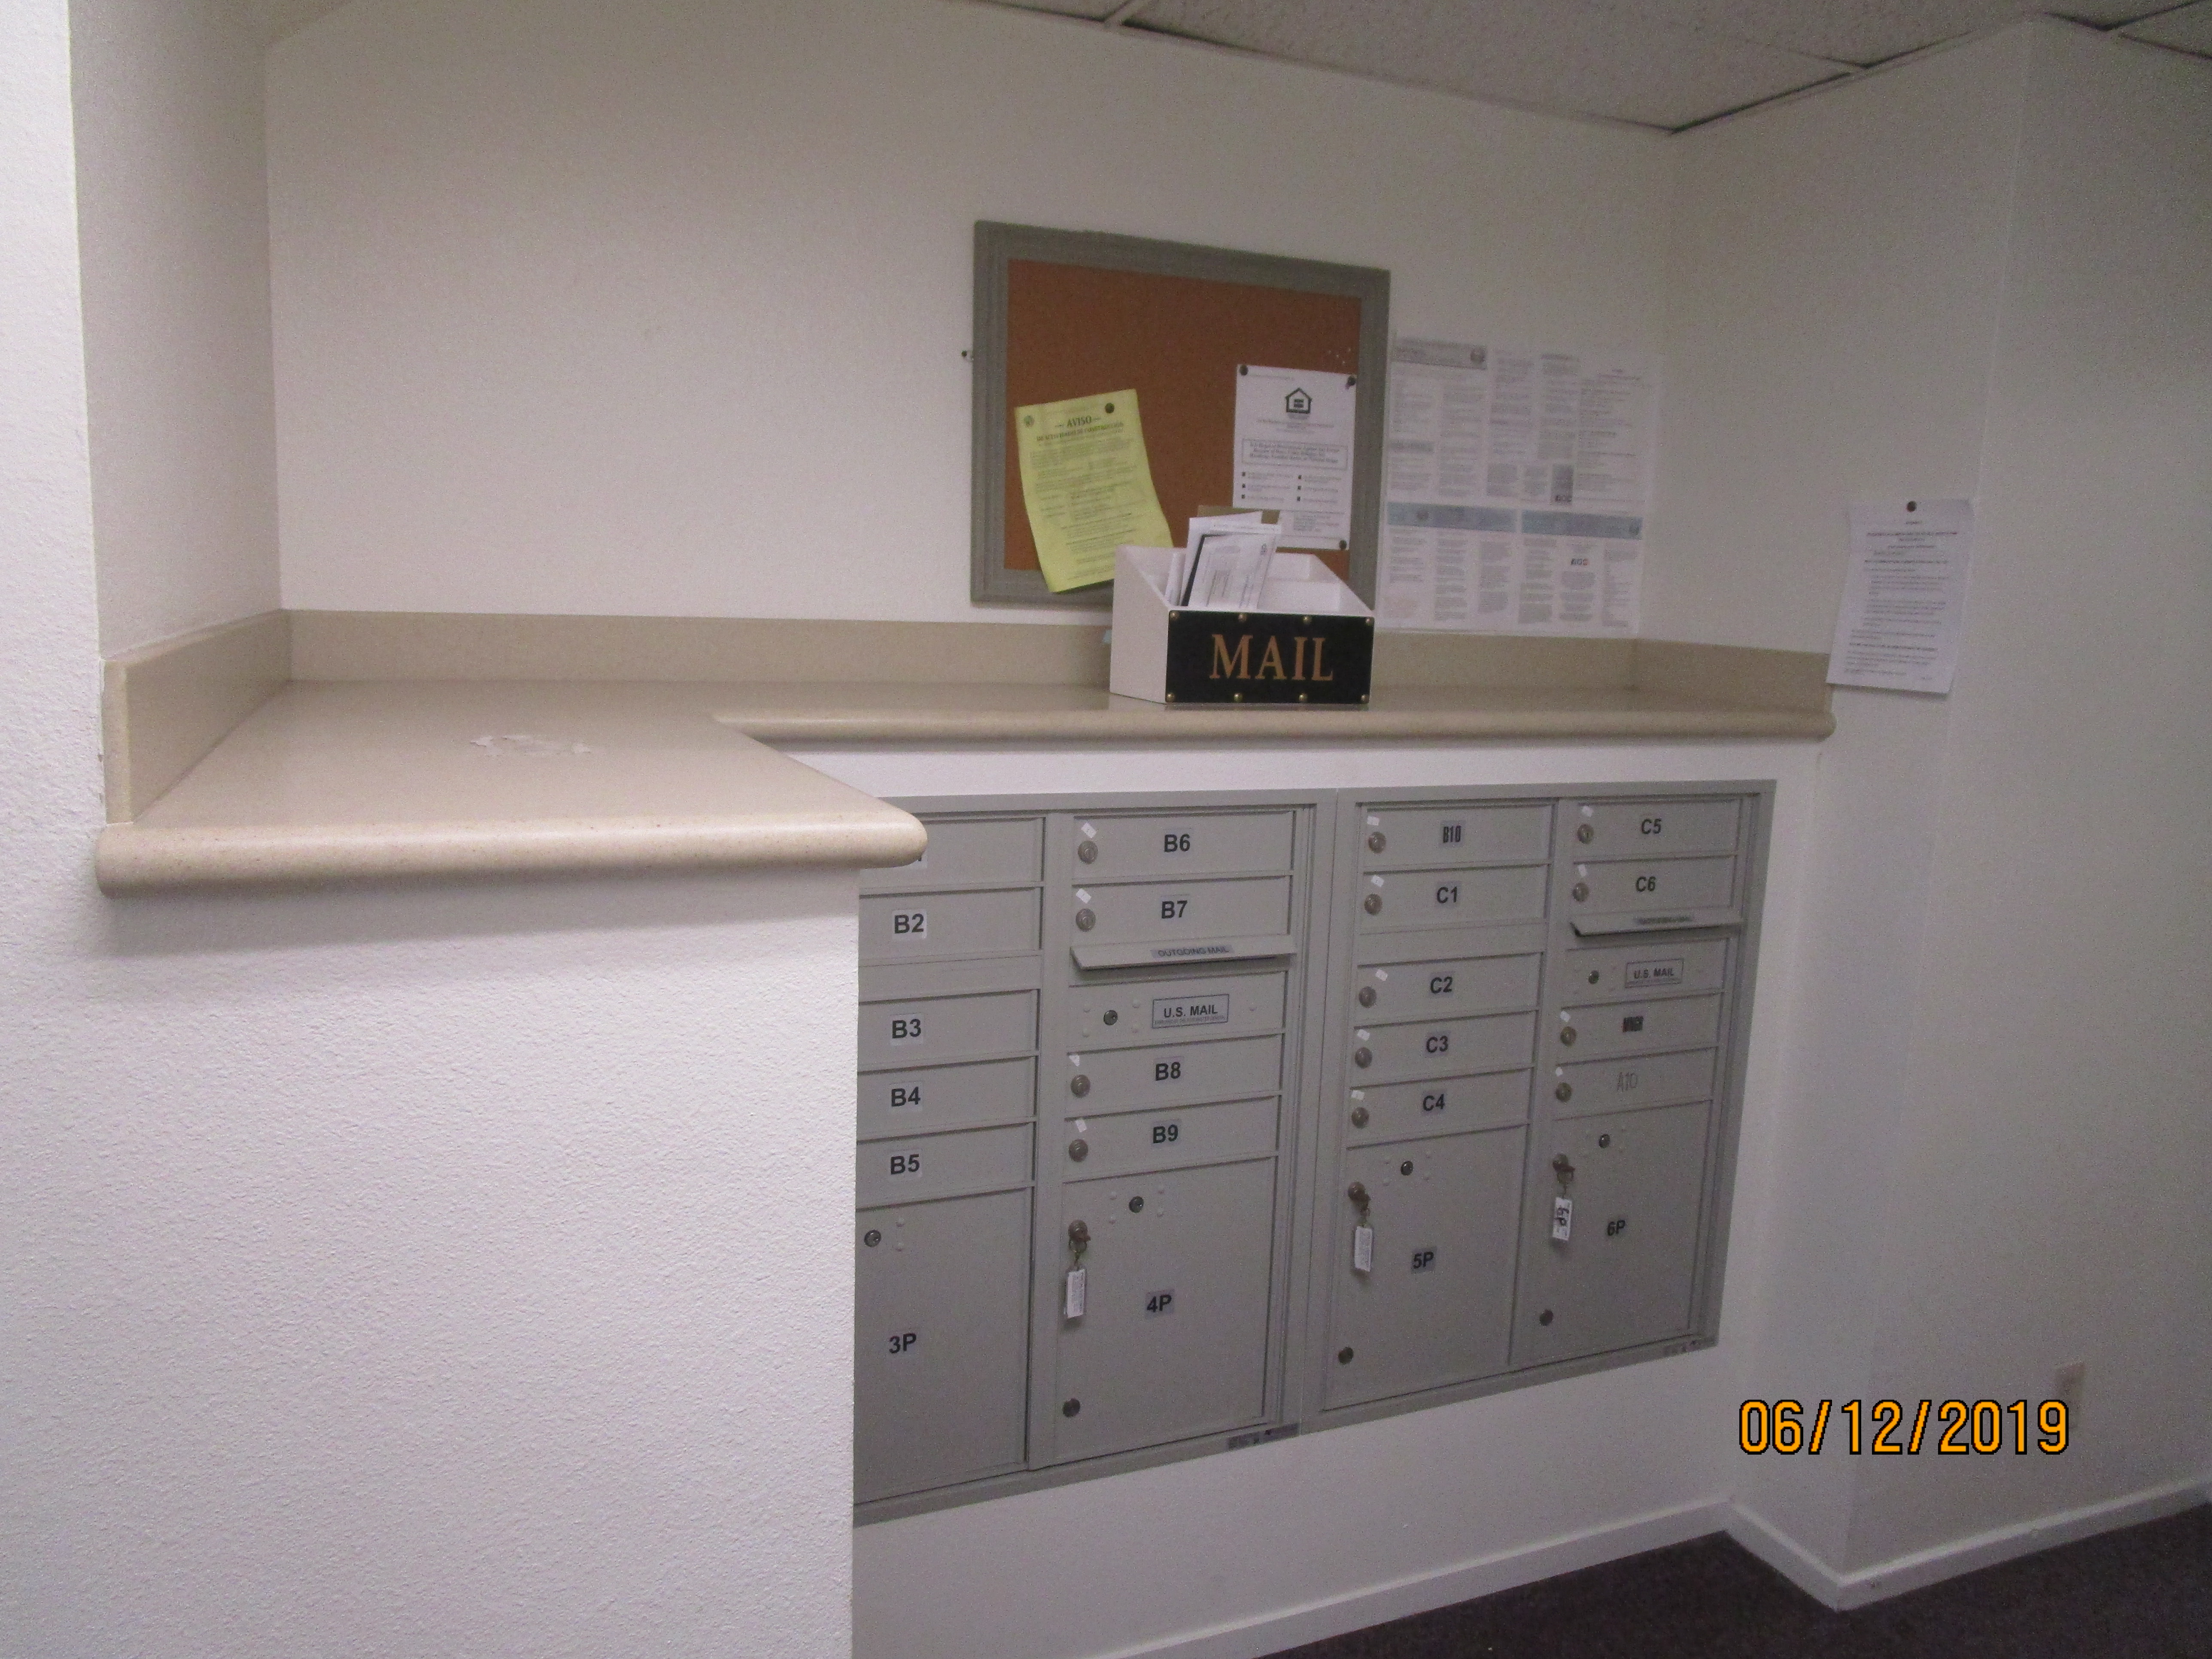 View of a mail room, a pin board on the wall, a white MAIL box, a set of gray locked mail boxes, Fair Housing flyers on the wall.